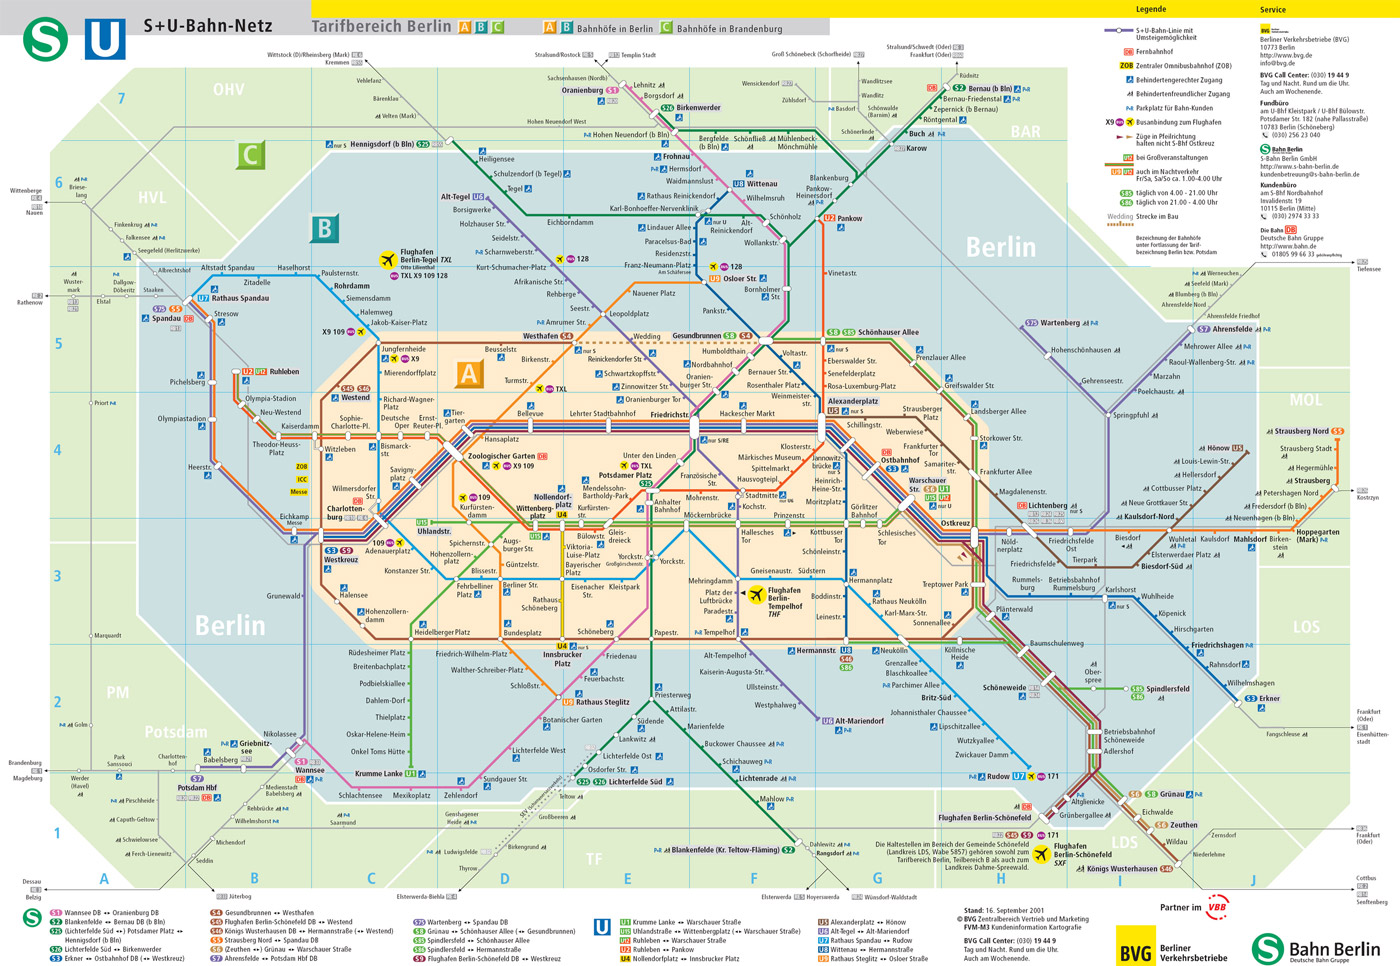 Back to Berlinand BEYOND: Berlin: By Foot, By BVG, By 